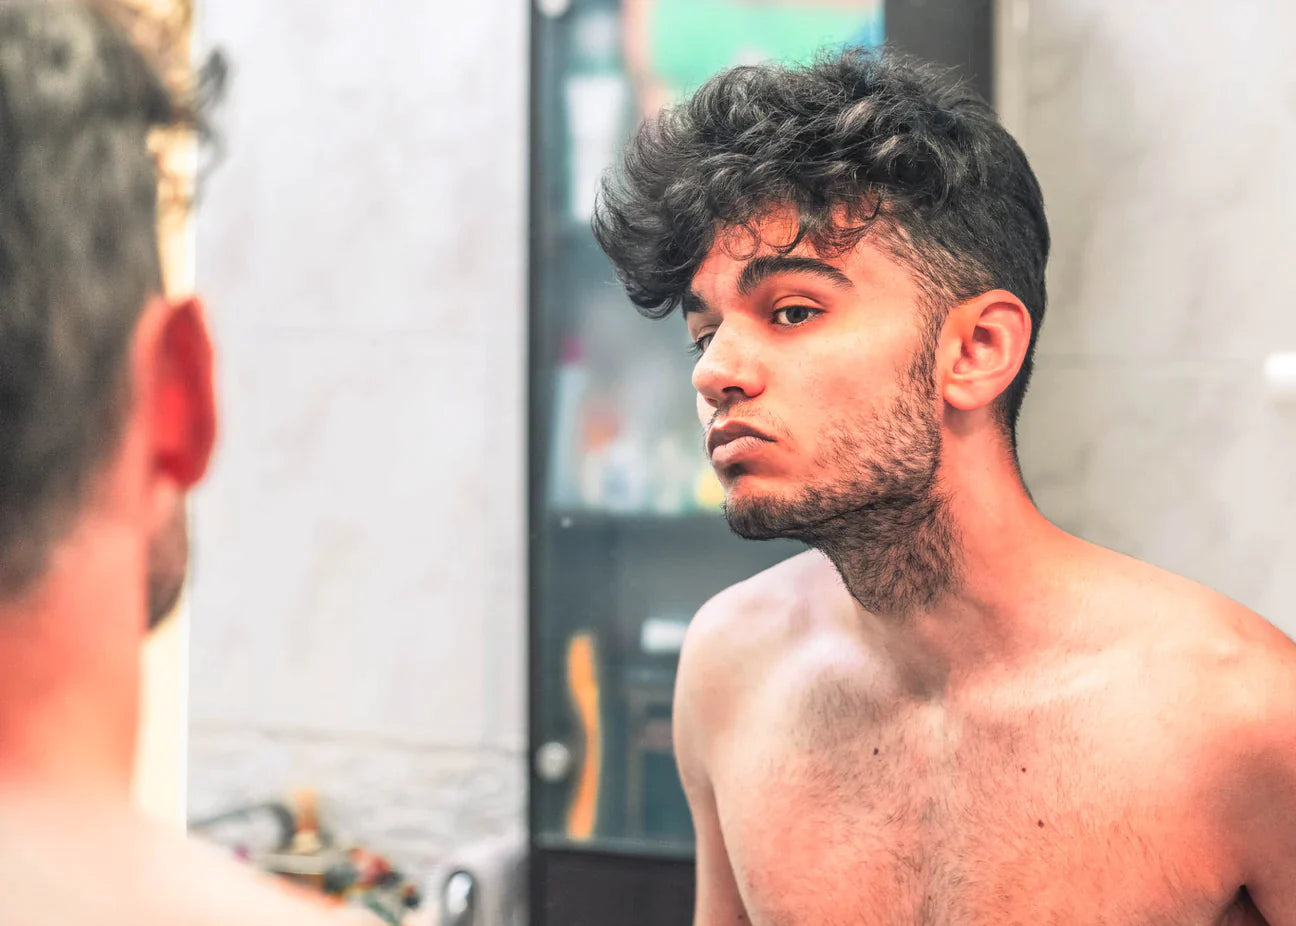 Man looking in mirror at hair and stubble on face.